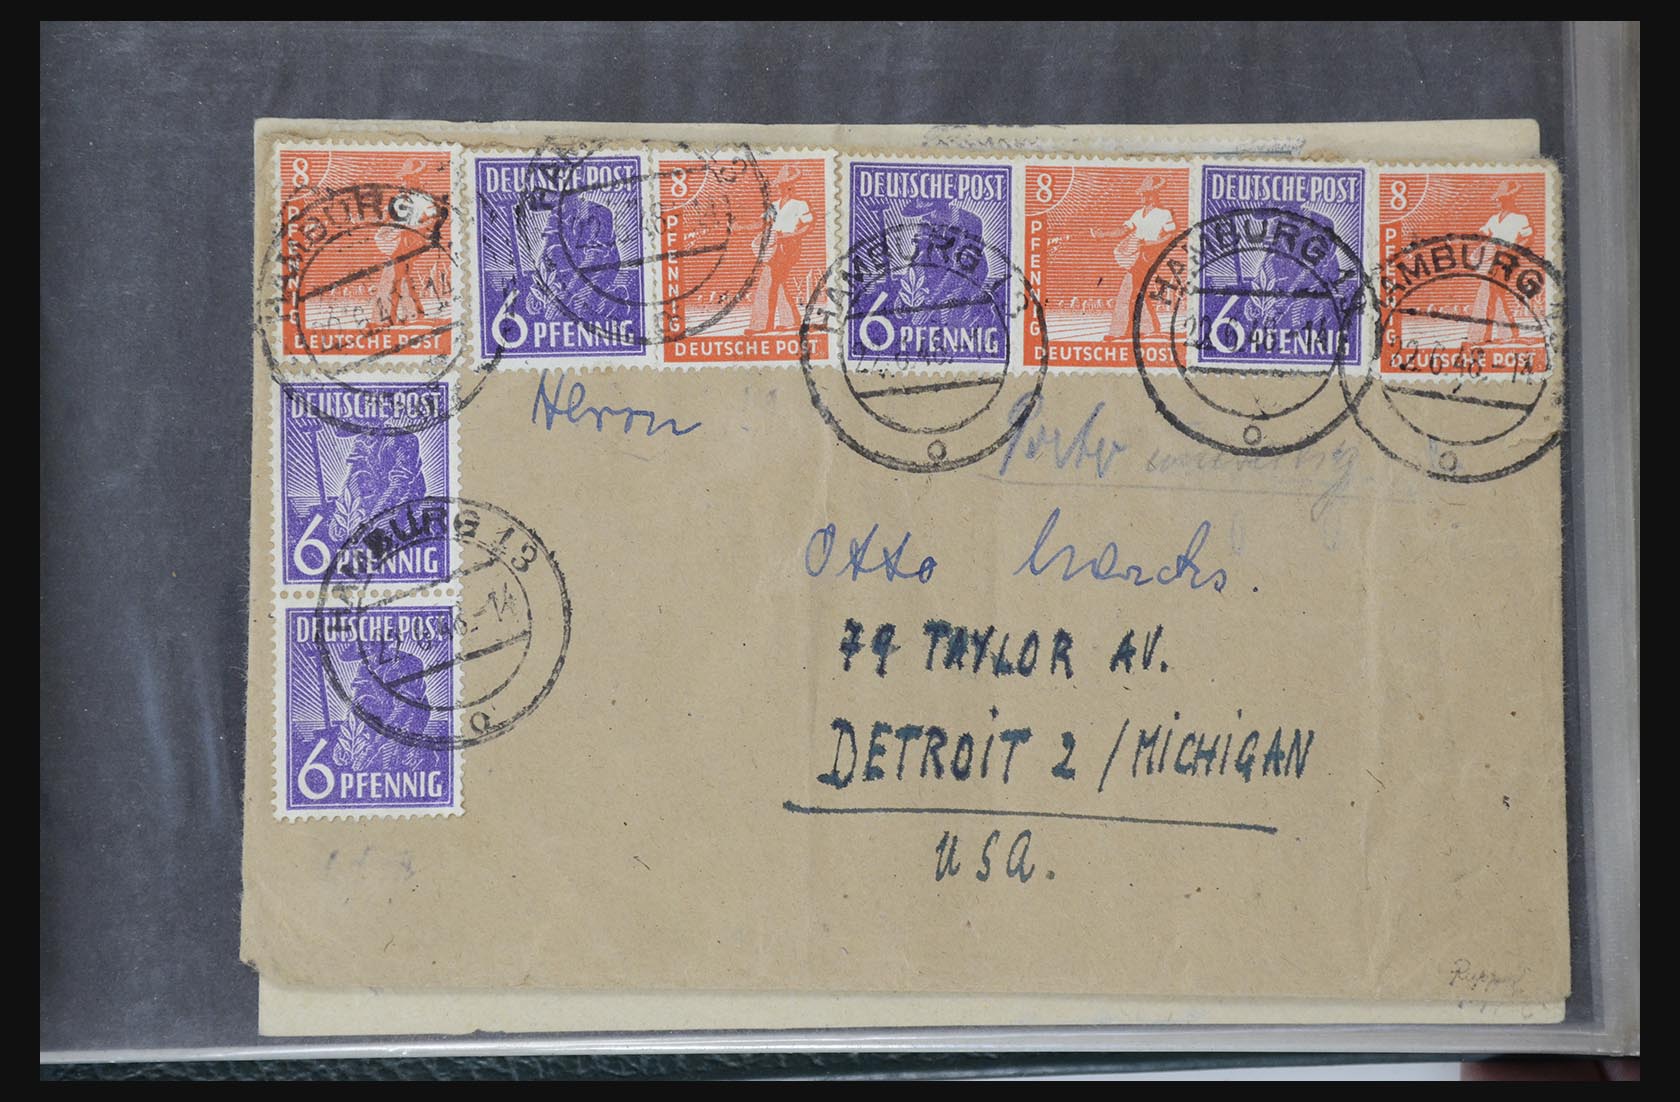 31581 026 - 31581 Germany covers and FDC's 1945-1981.